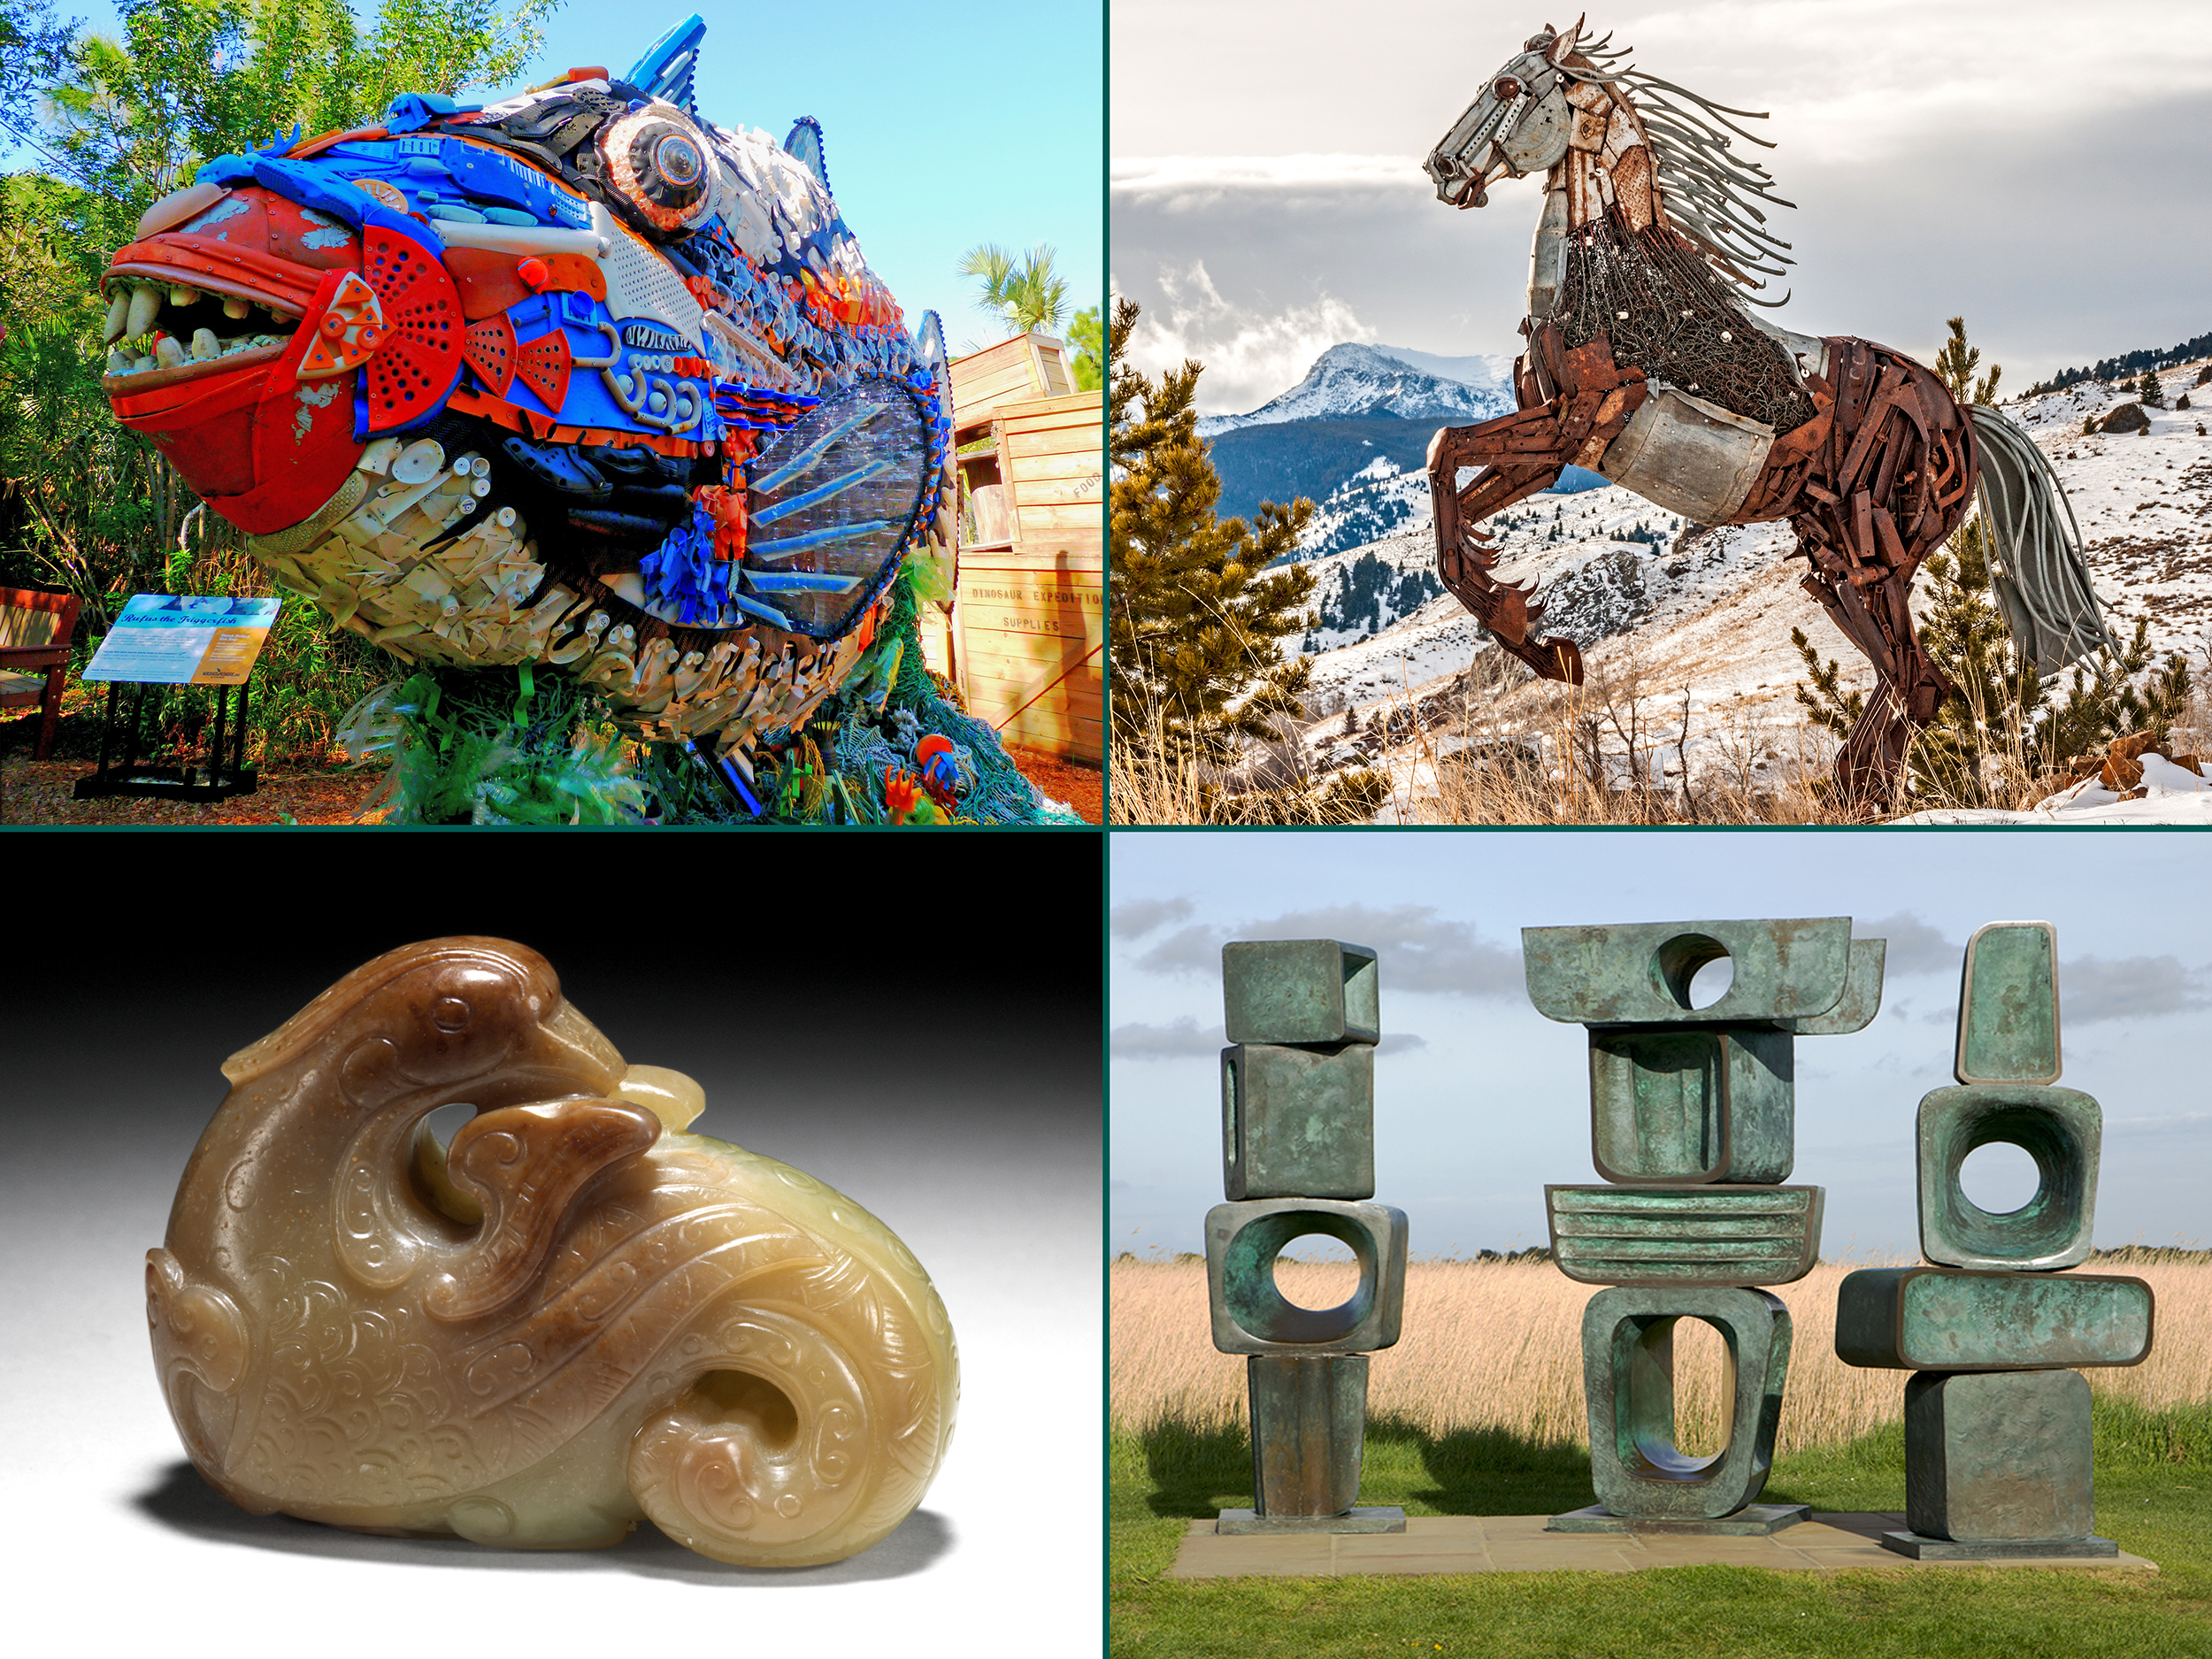 A colorful plastic fish sculpture, a metal horse sculpture, a small jade sculpture, and a large bronze abstract sculpture